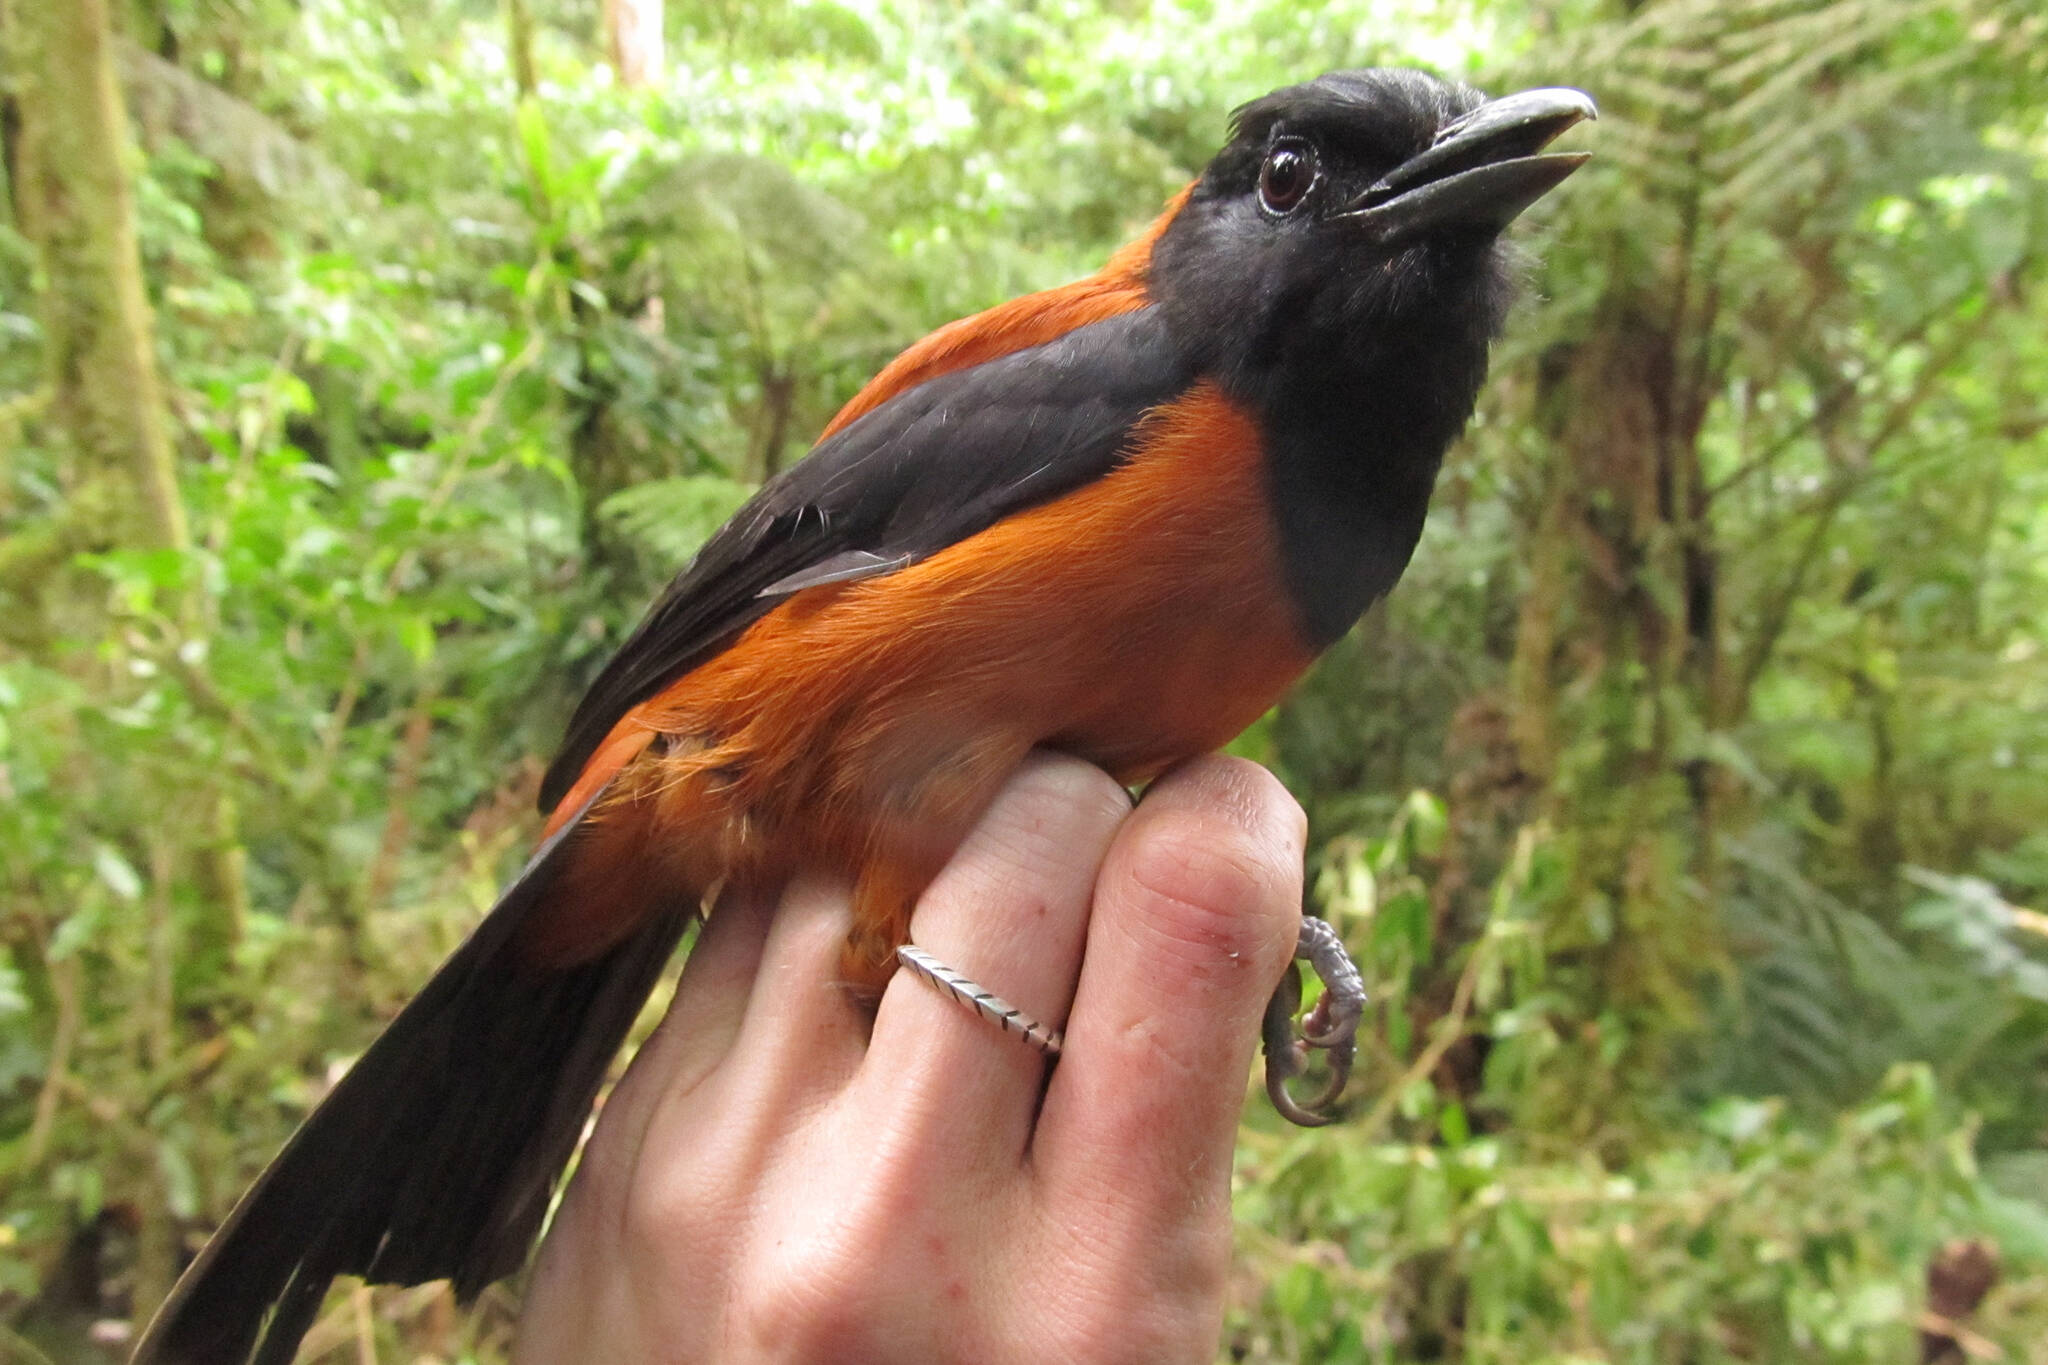 This photo available under a Creative Commons license shows a hooded pitohui (Pitohui dichrous) YUS Conservation area on the Huon Peninsula, Morobe Province, Papua New Guinea. (Courtesy Photo / Wikimedia)